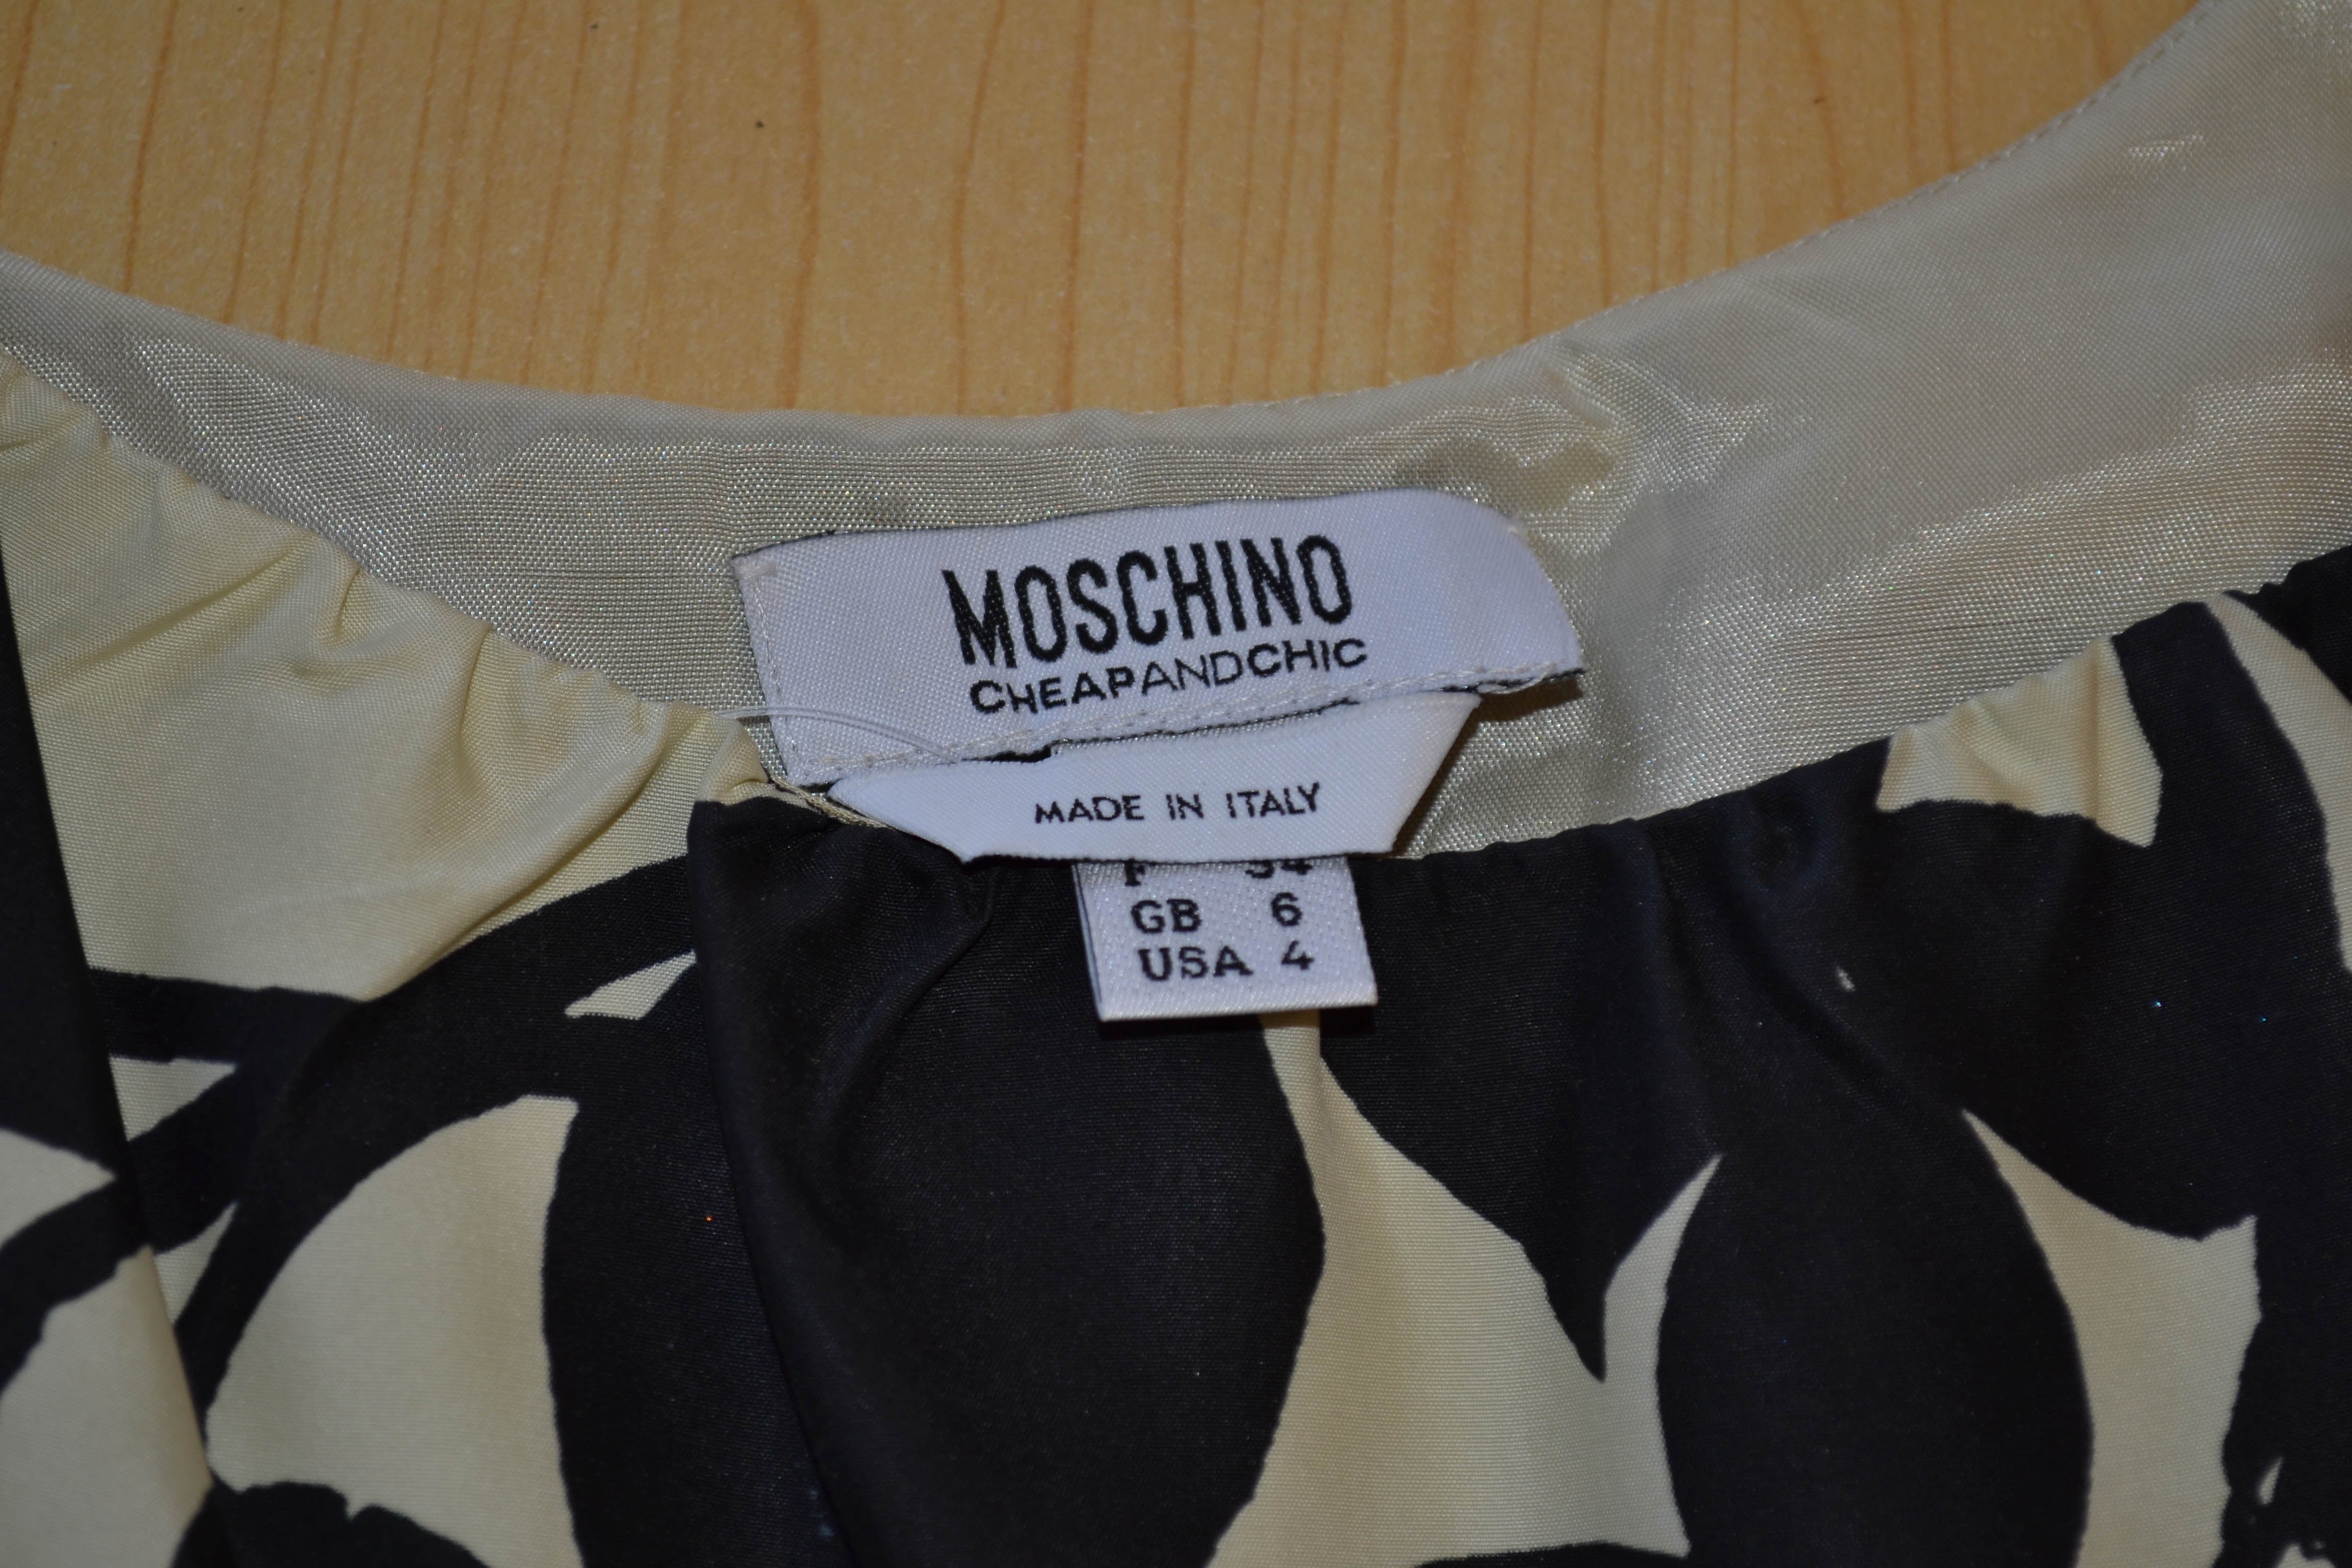 Authentic Moschino Black And Beige Floral Tank Top Size 4